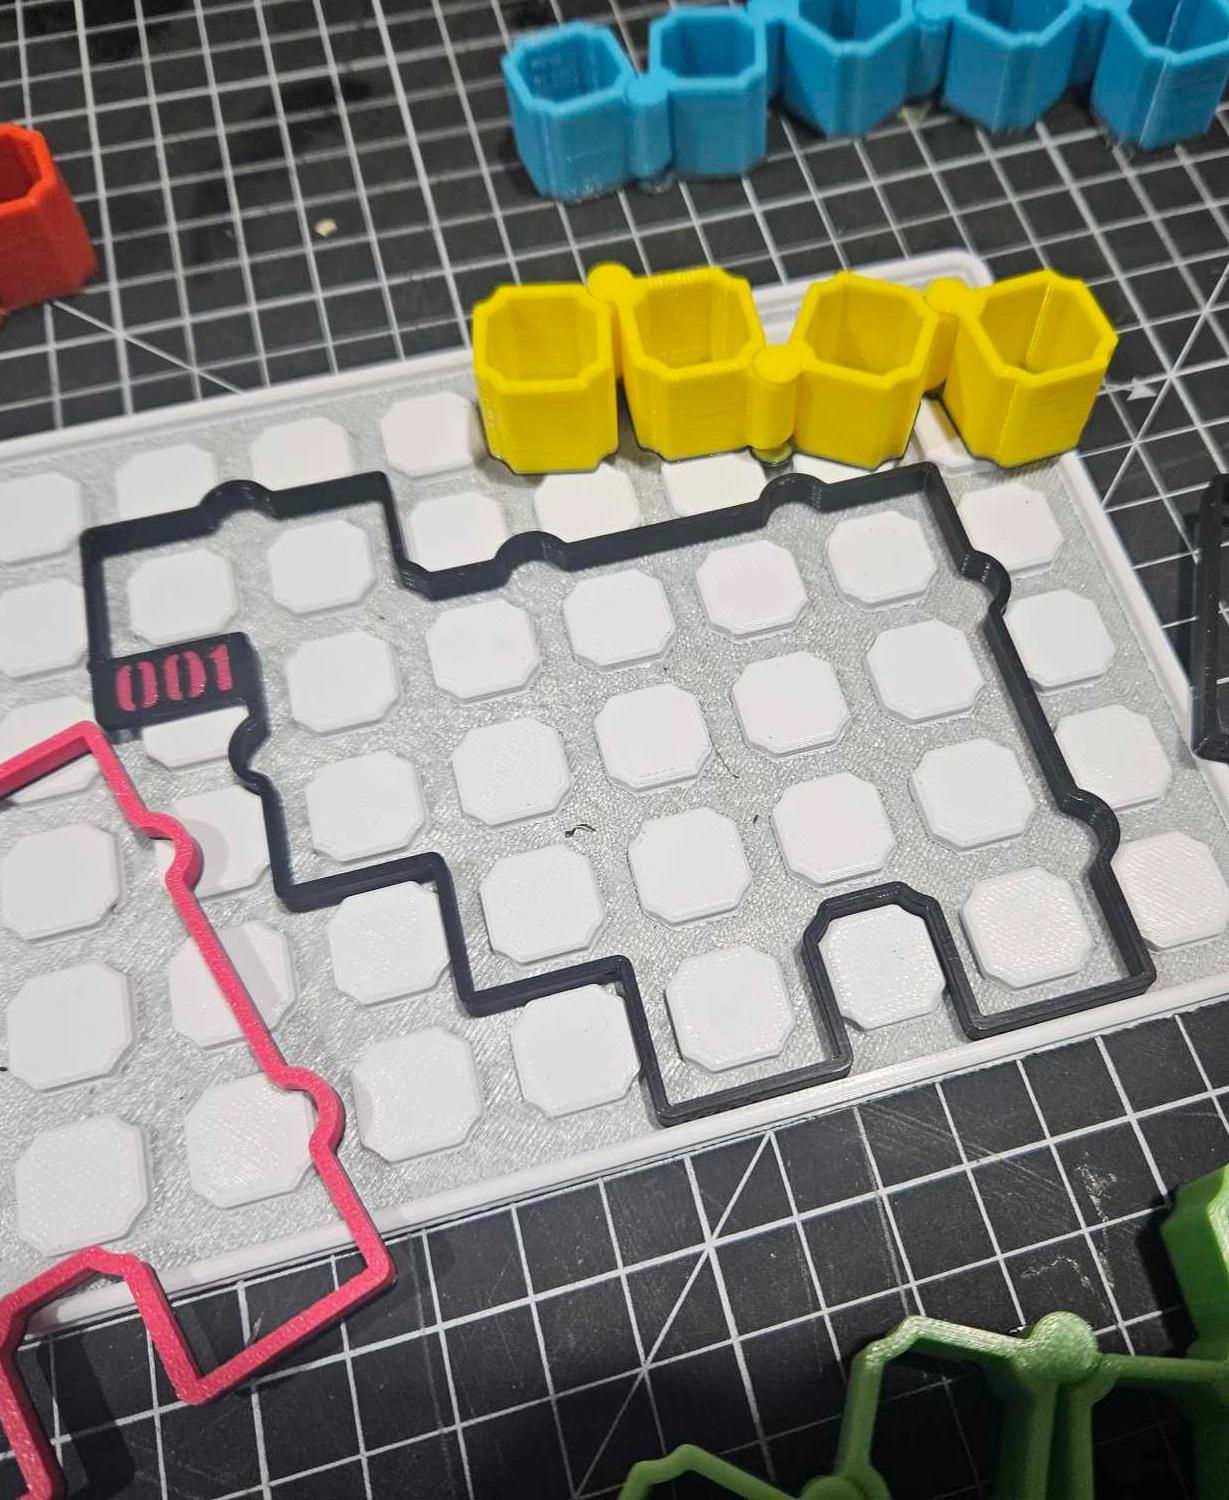 SKEWBITS (v1) Puzzle Game for 3D Printing *OUTDATED* - Slight modification to make the numbers easier to see. Now to reprint them all. - 3d model